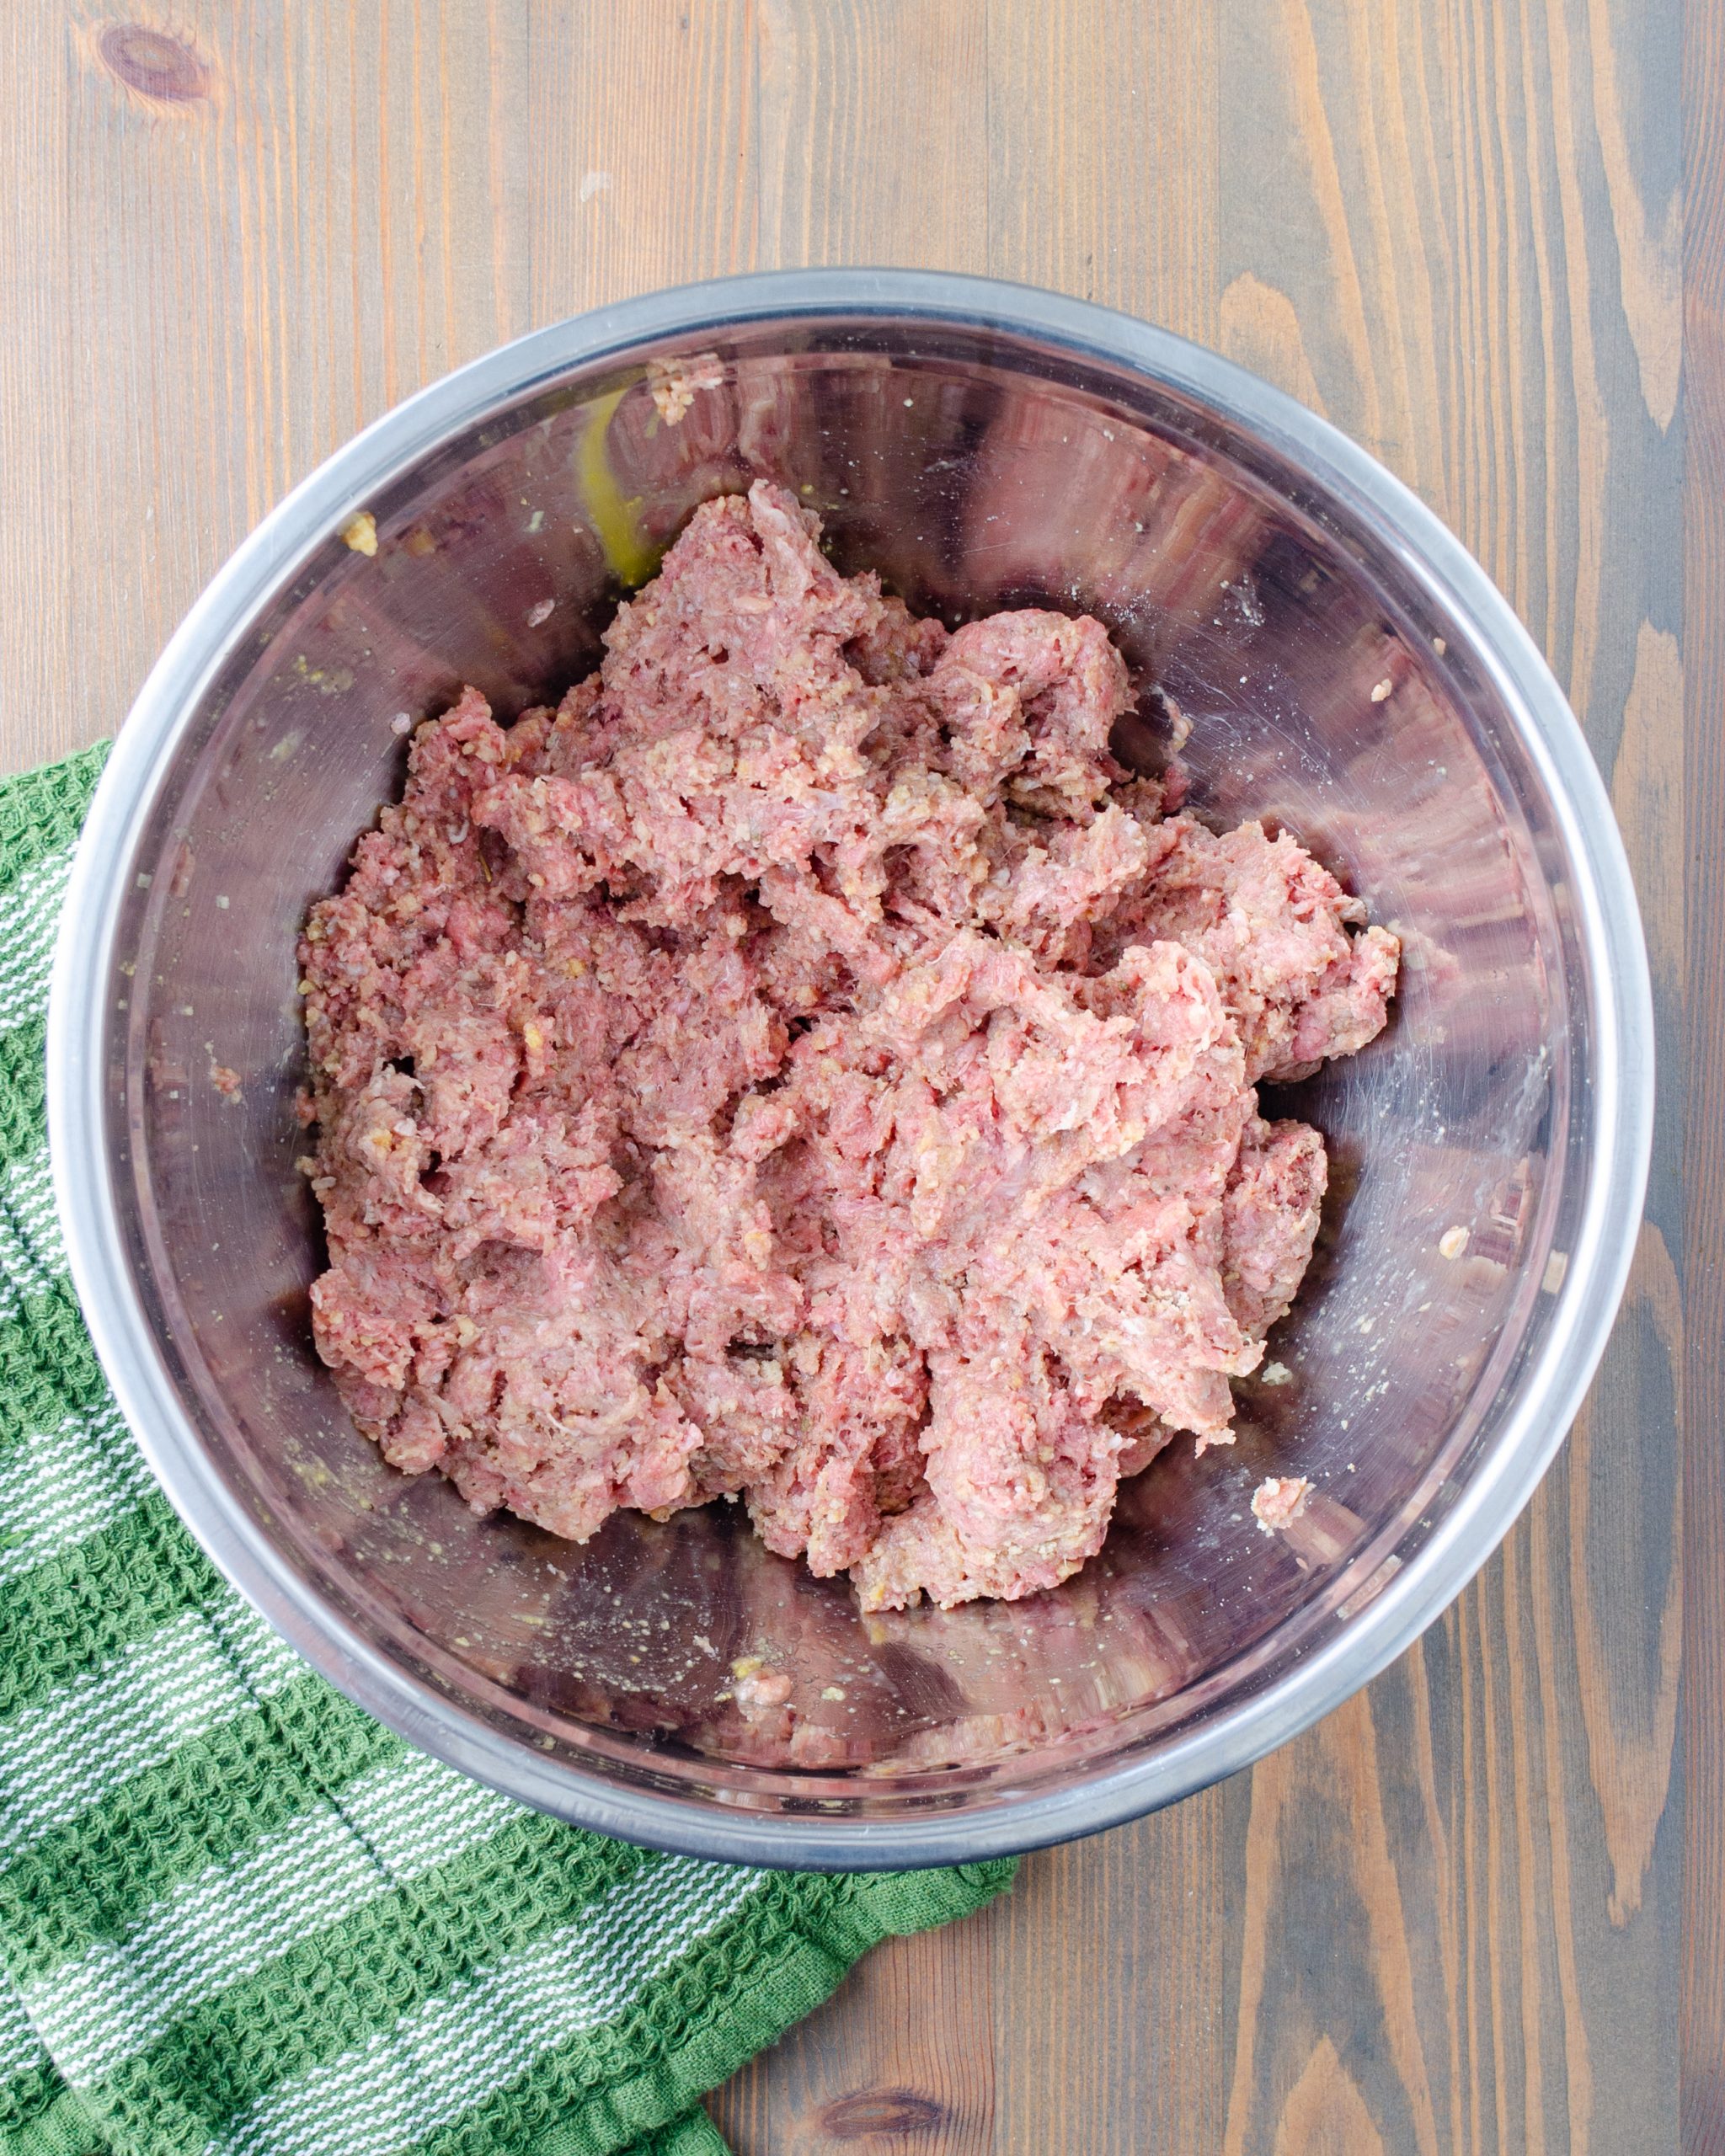 If using ground beef, add the steak ingredients to a large bowl, and mix to combine.